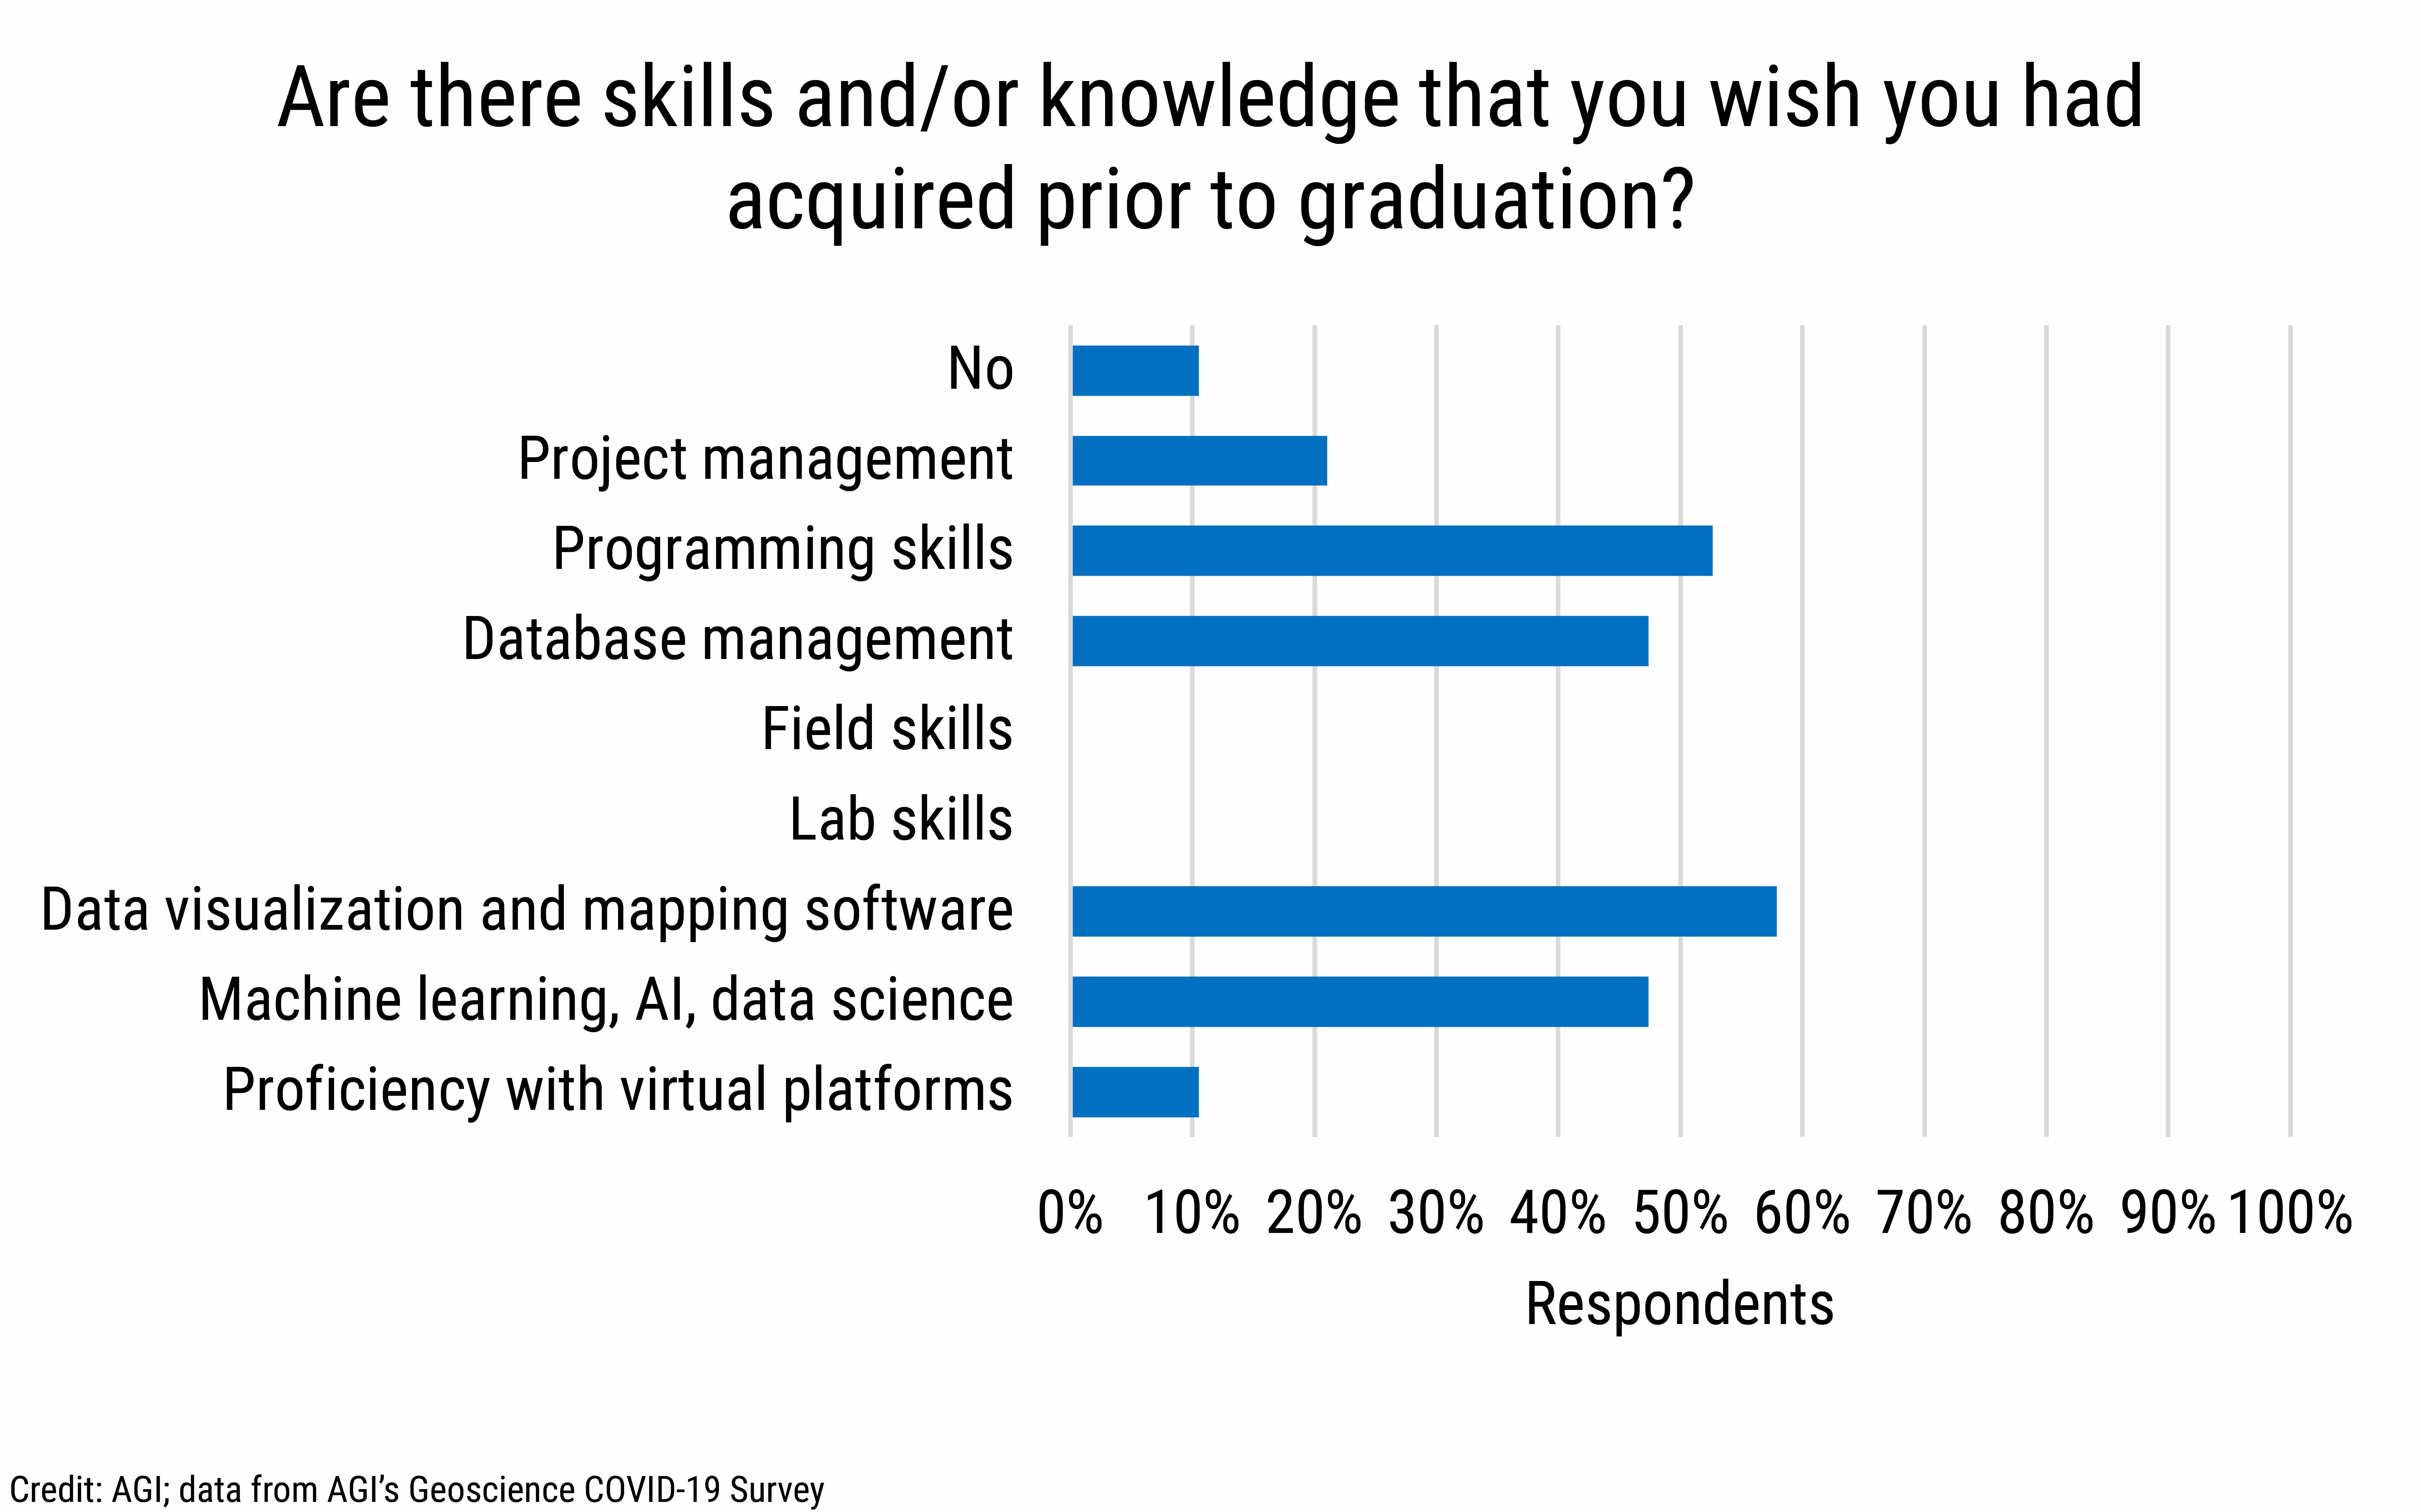 DB_2021-026 chart 03: Are there skills and/or knowledge that you wish you had acquired prior to graduation? (Credit: AGI; data from AGI&#039;s Geoscience COVID-19 Survey)